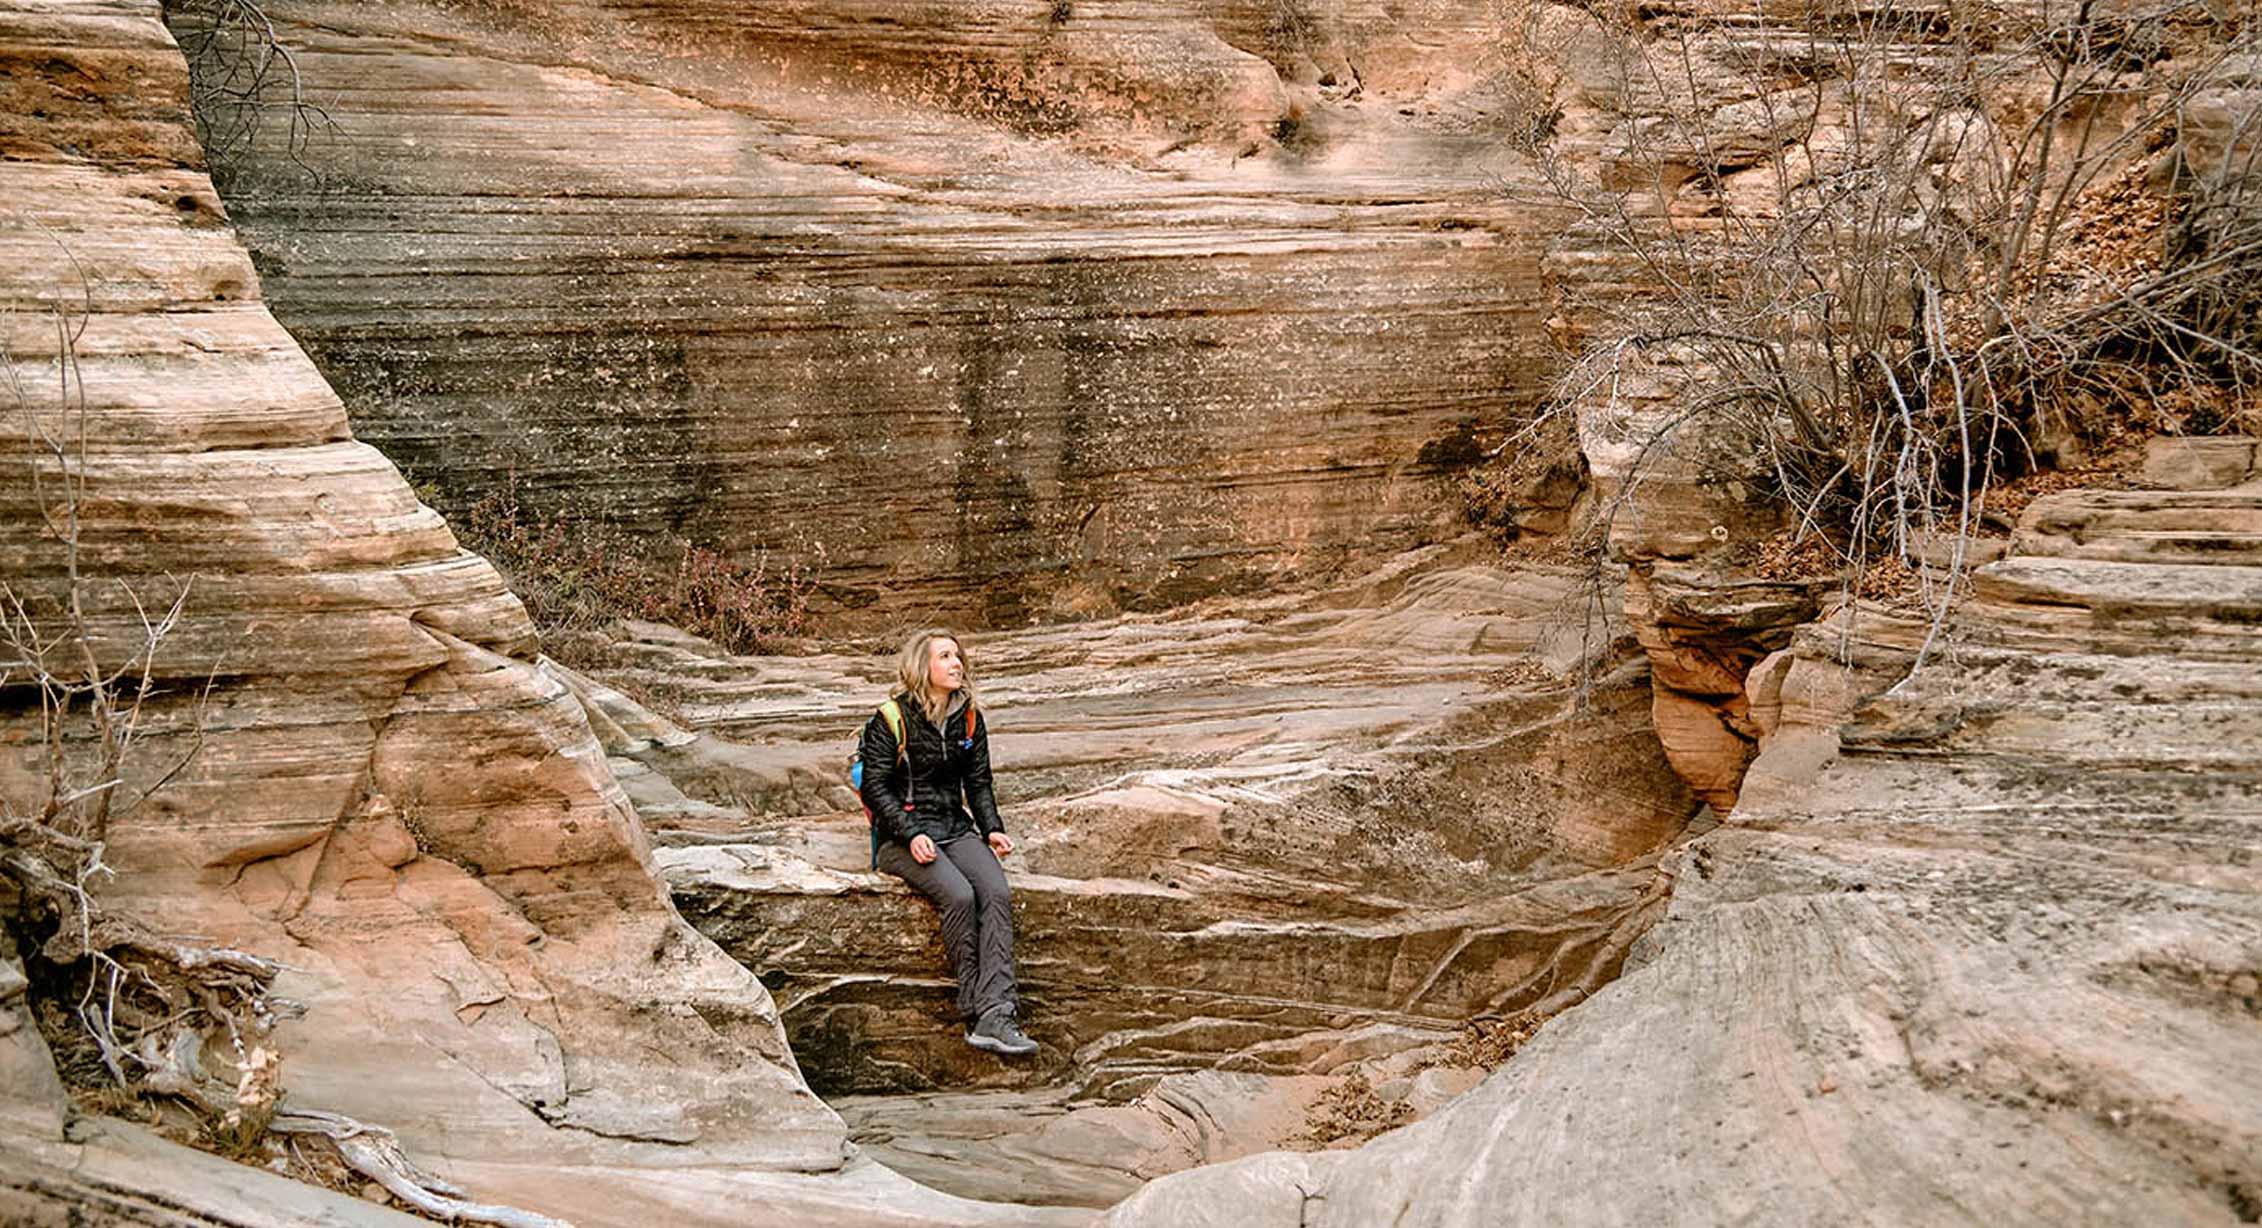 Taking in the beauty of Zion National Park with KEEN hiking boots